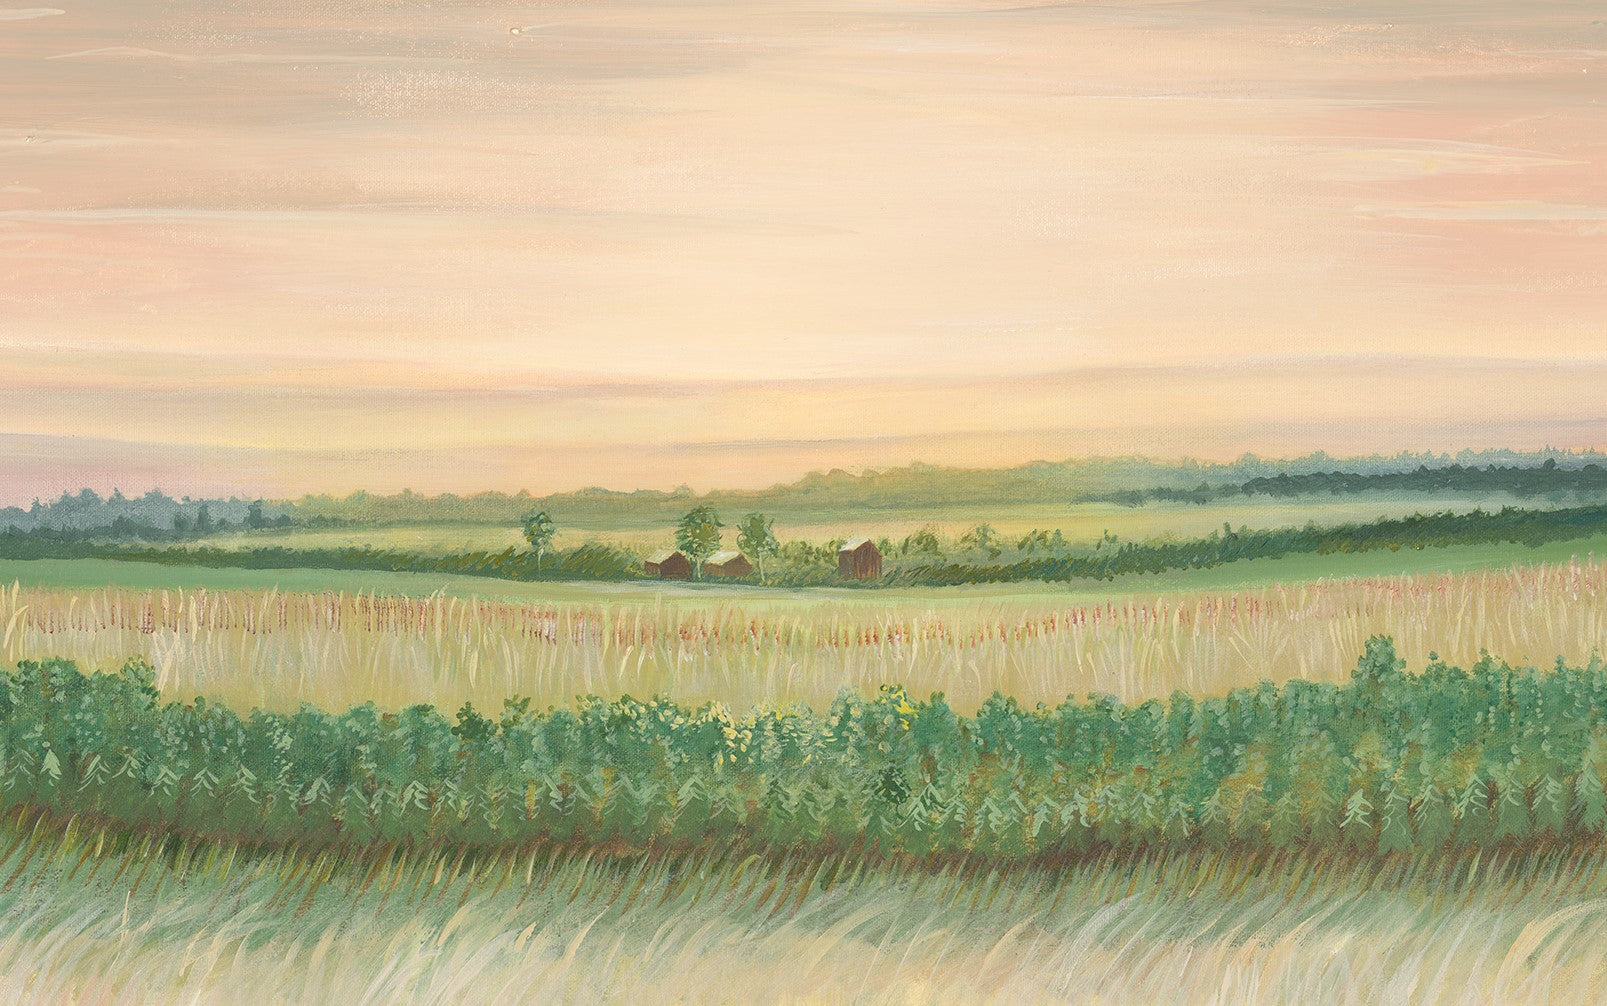 Original Painting. Weathered Landing's Field at Sunset Canvas Wall Art Print. Canvas art prints made in Canada and US. Beautiful in a farmhouse, country, or rustic home. Find a variety of home decor and canvas wall art prints at Weathered Landing. Located in Komoka, Ontario, local delivery is available. Shipping to Canada and the US.